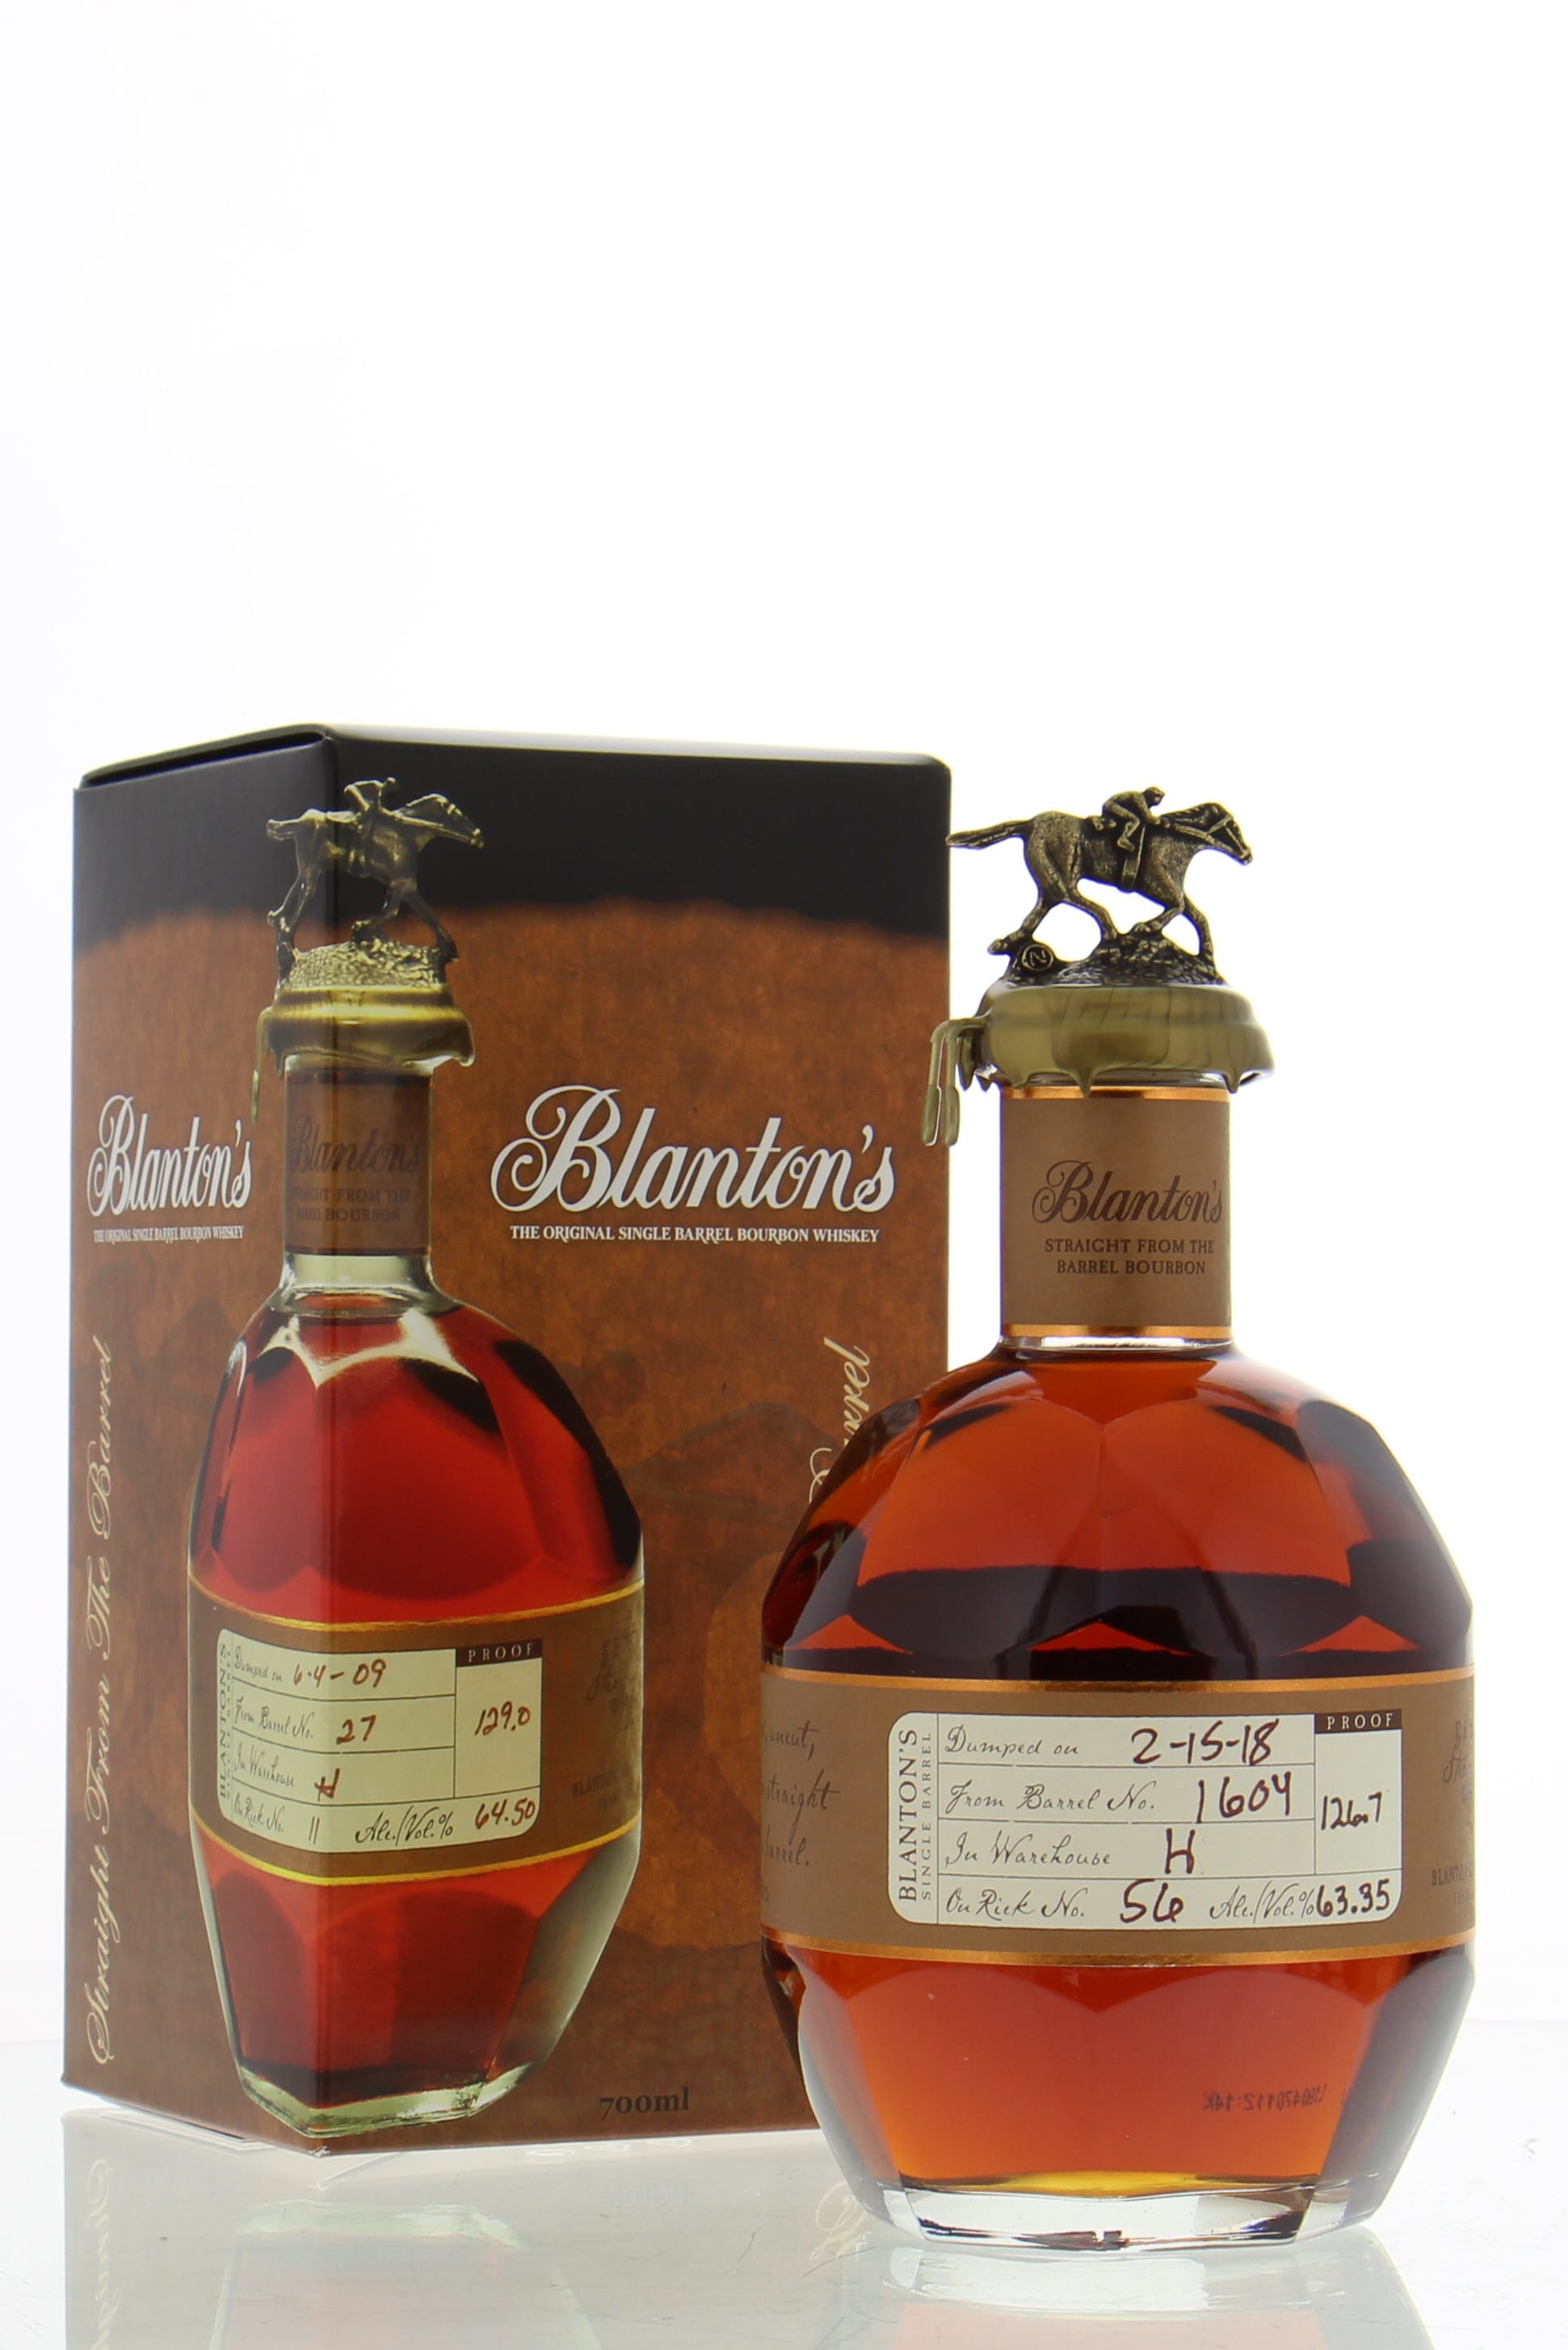 Buffalo Trace - Blanton's Straight from the Barrel Cask 1602 63.35% NV In Original Container